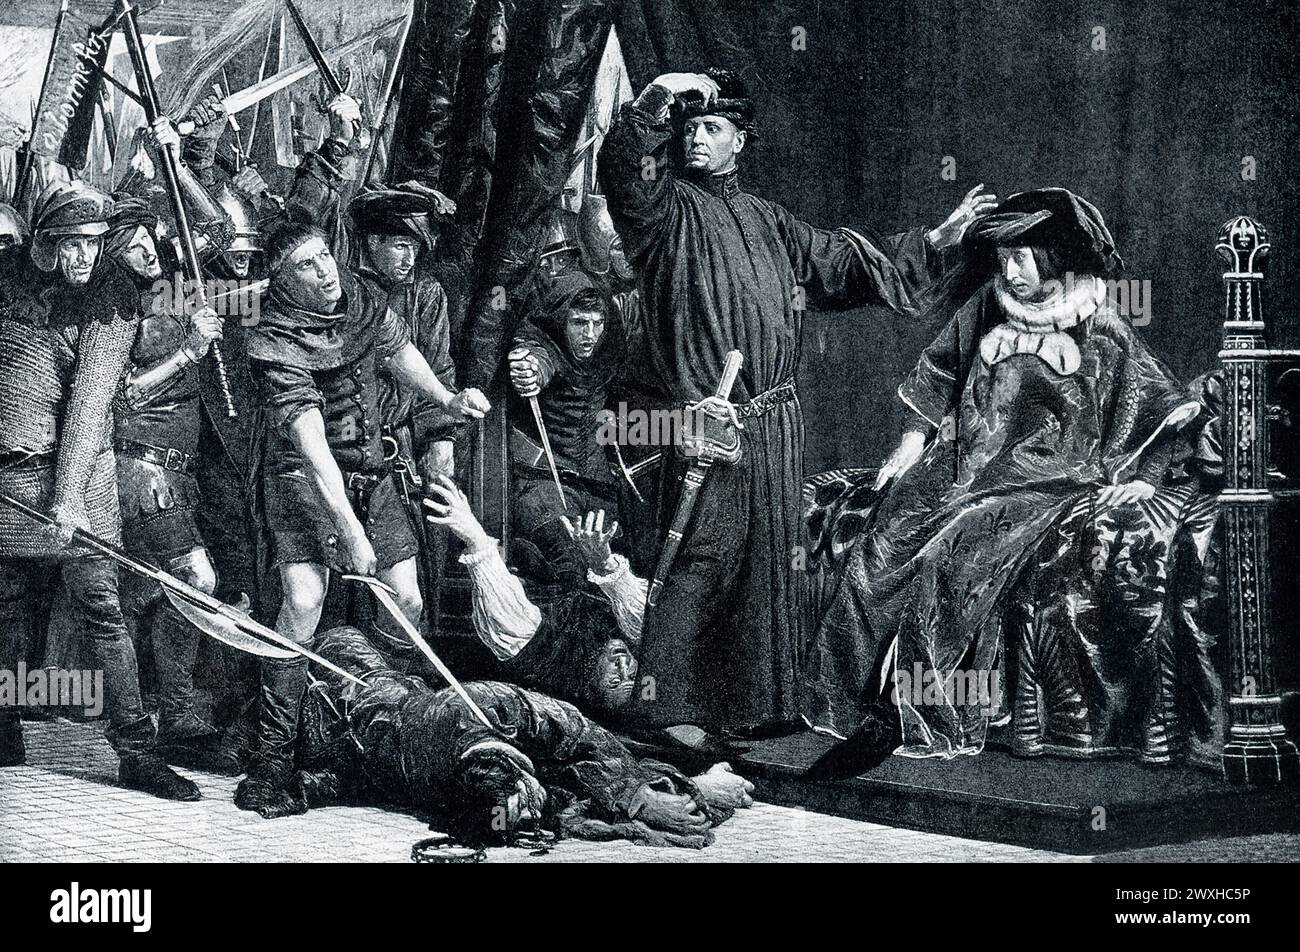 The early 1900s caption reads:'MARCEL THREATENS THE DAUPHIN.—Etienne Marcel was a citizen of Paris, the first great leader of the people against their kings [and Provost of the Merchants of Paris and representative of the bourgeoisie]. The prince or 'Dauphin' Charles was ruling France, the king, his father, being a prisoner in the hands of the English [King John taken prisoner after battle of Poitiers in 1356]. Charles and his counsellors governed so harshly, that Marcel and his followers took possession of Paris and slew Charles' counsellors before his face. Their blood spattered over him, an Stock Photo